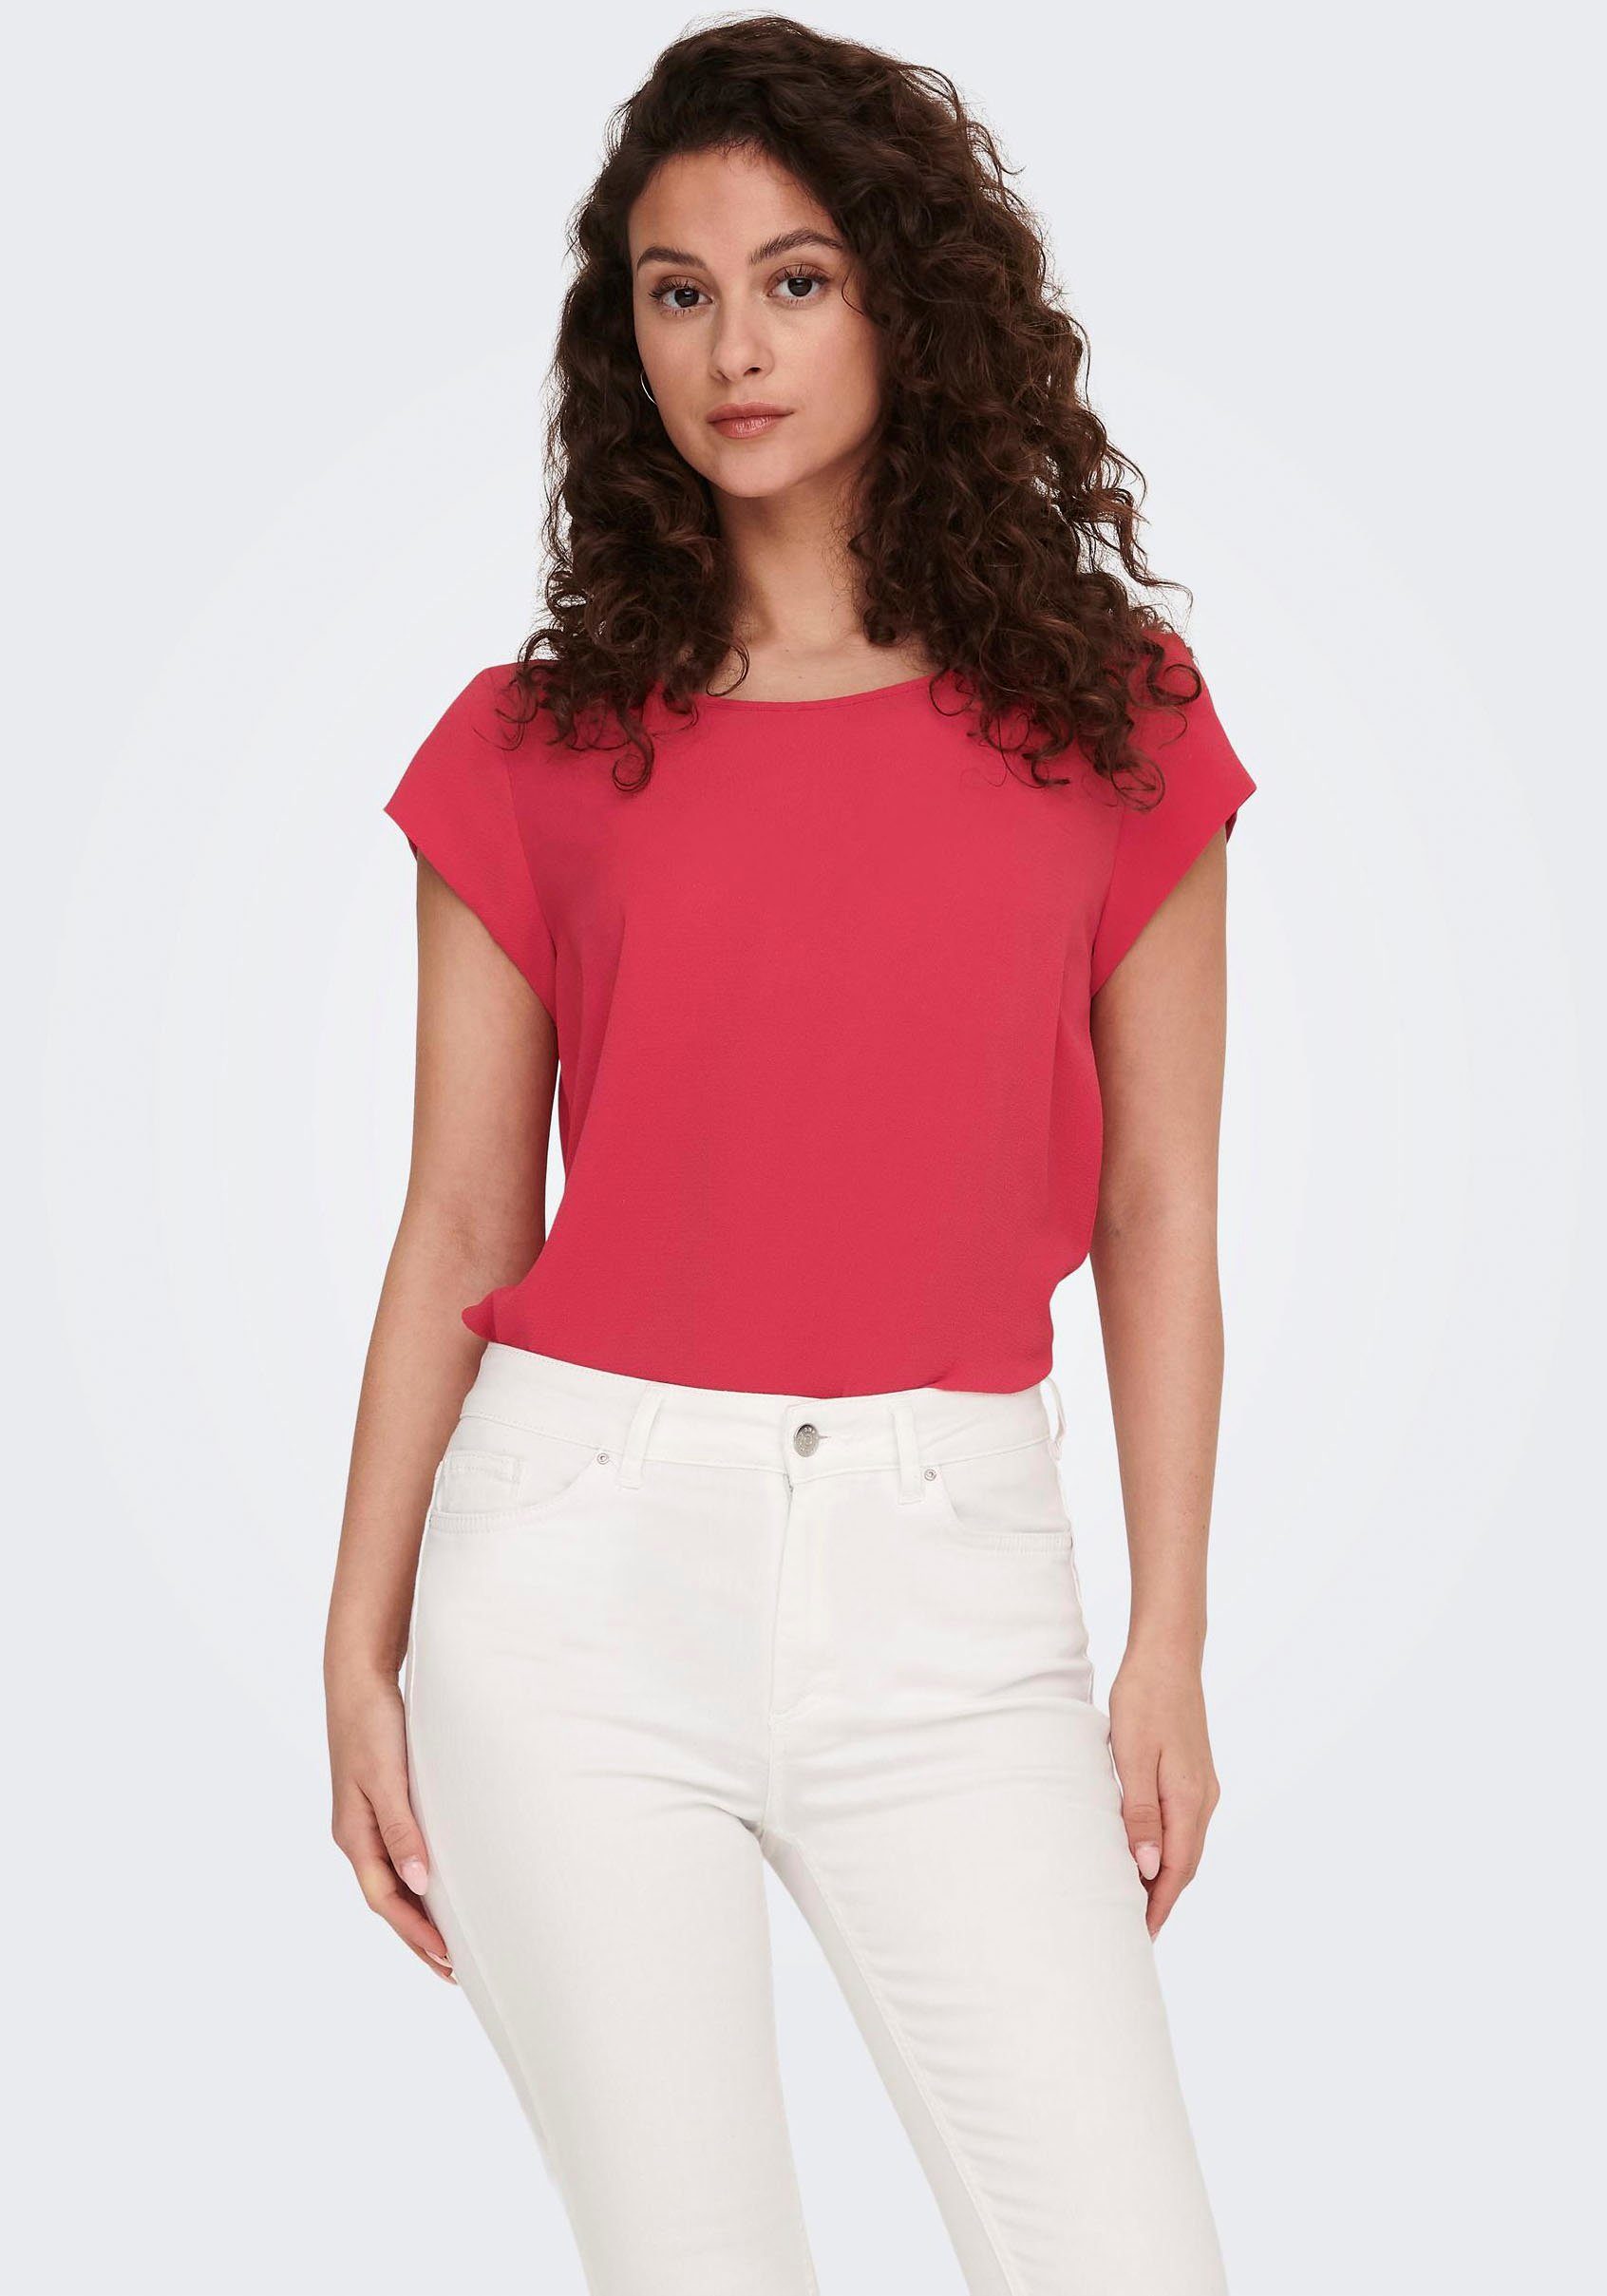 Anpreisung ONLY Kurzarmbluse ONLVIC S/S Teaberry SOLID TOP NOOS PTM